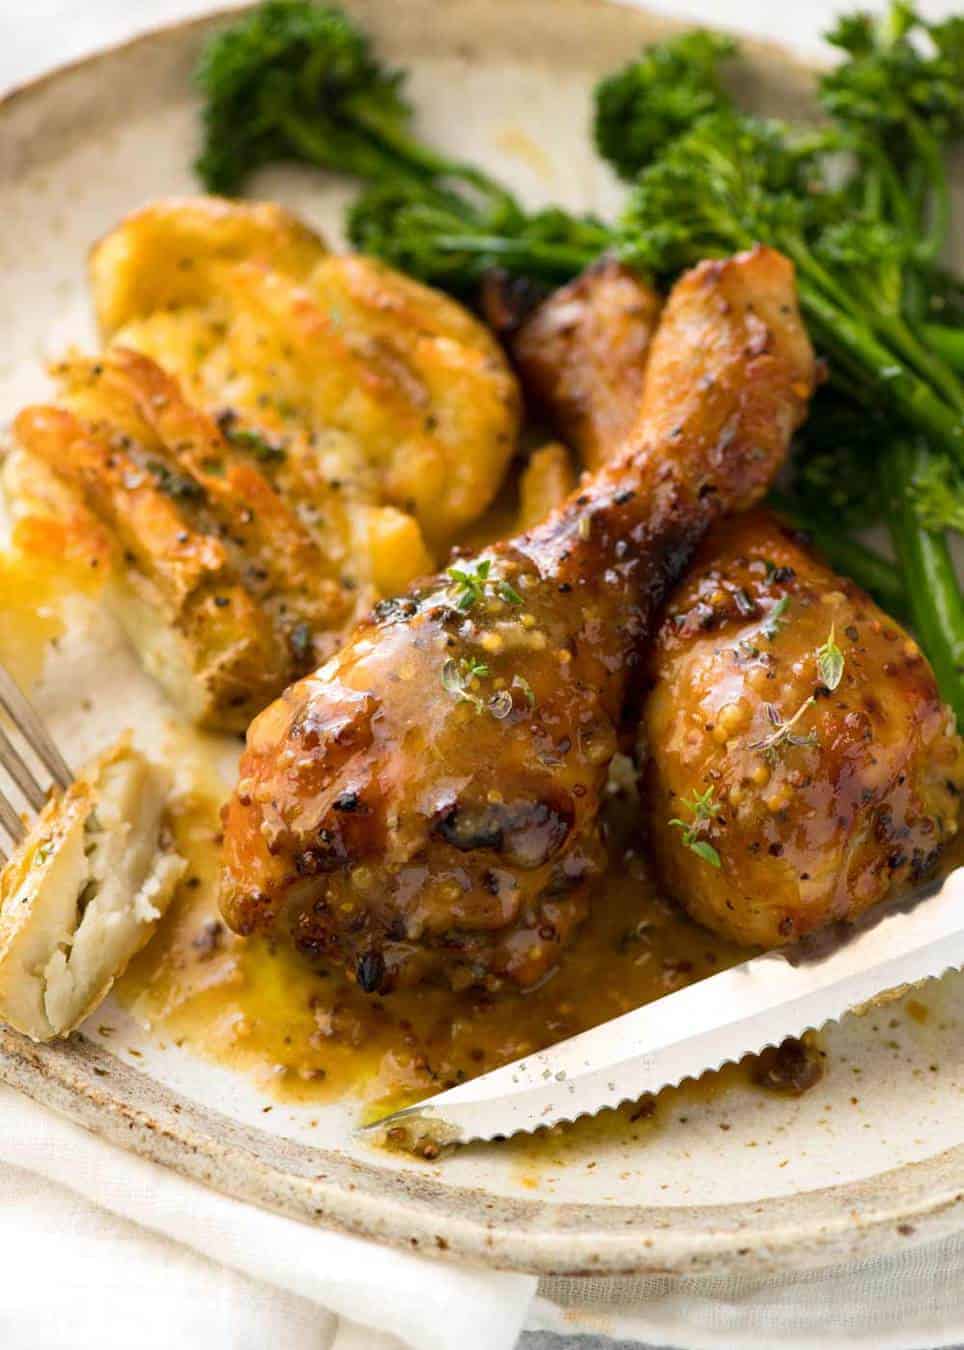 Honey Mustard Baked Chicken Drumsticks with Smashed Potatoes on a silver tray with a side of steamed broccolini on a rustic ceramic plate, ready to be eaten